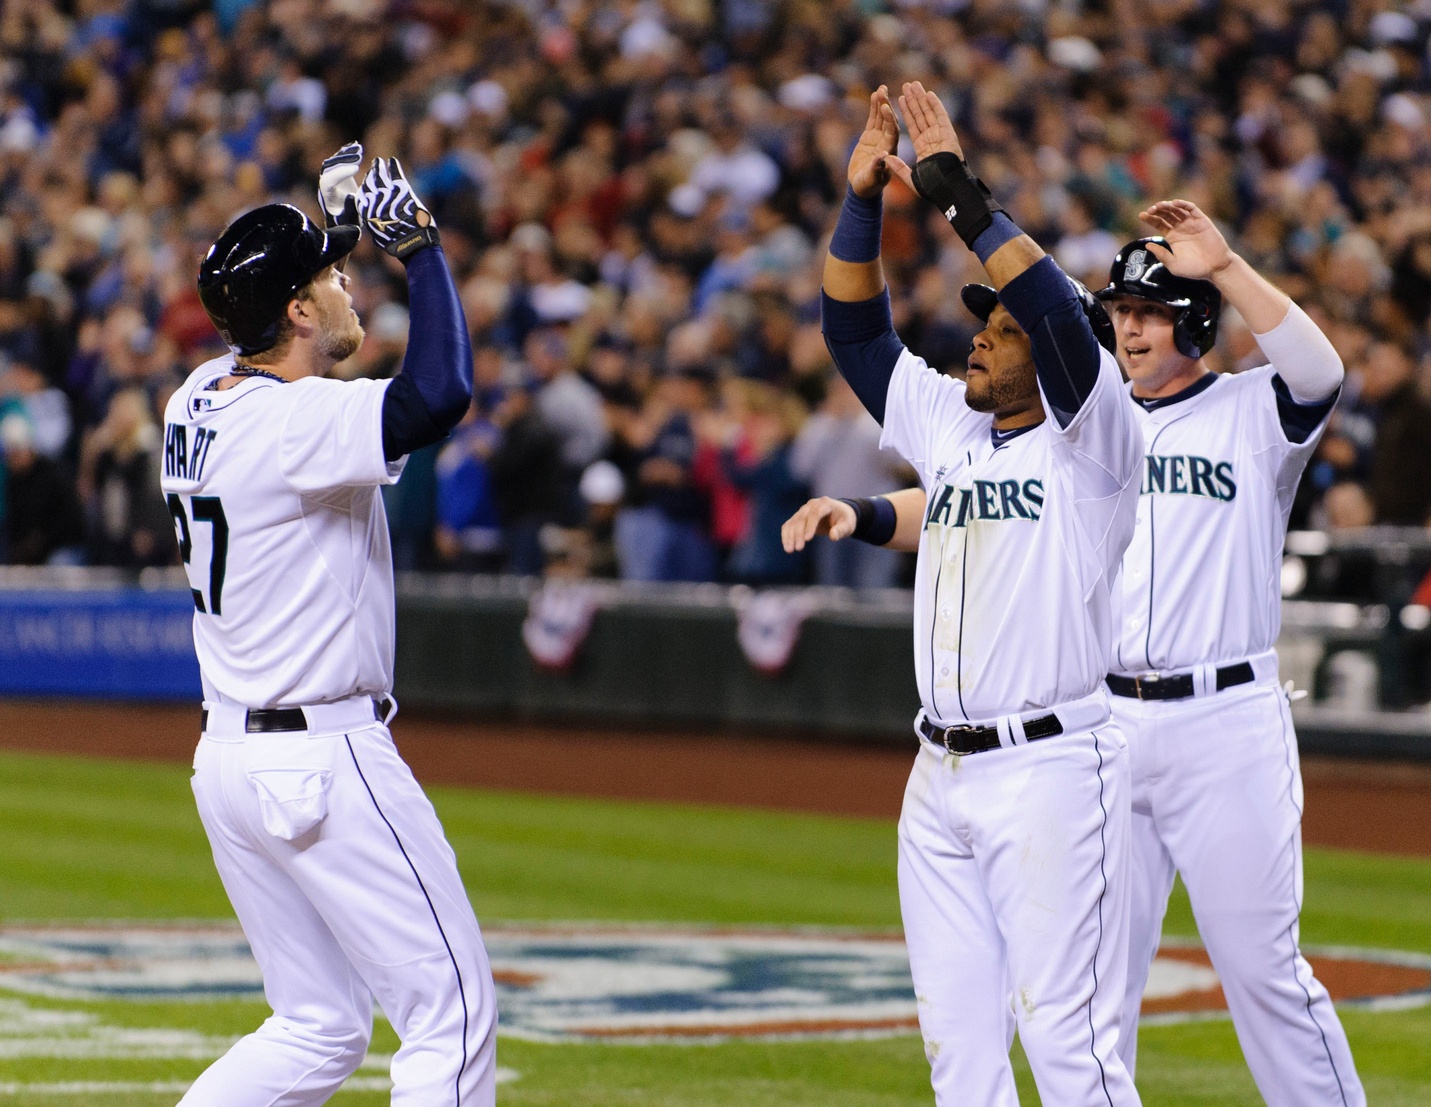 Seattle will need to see this more often if they plan to win the AL West. Photo by Steven Bisig, USA Today Sports Images.